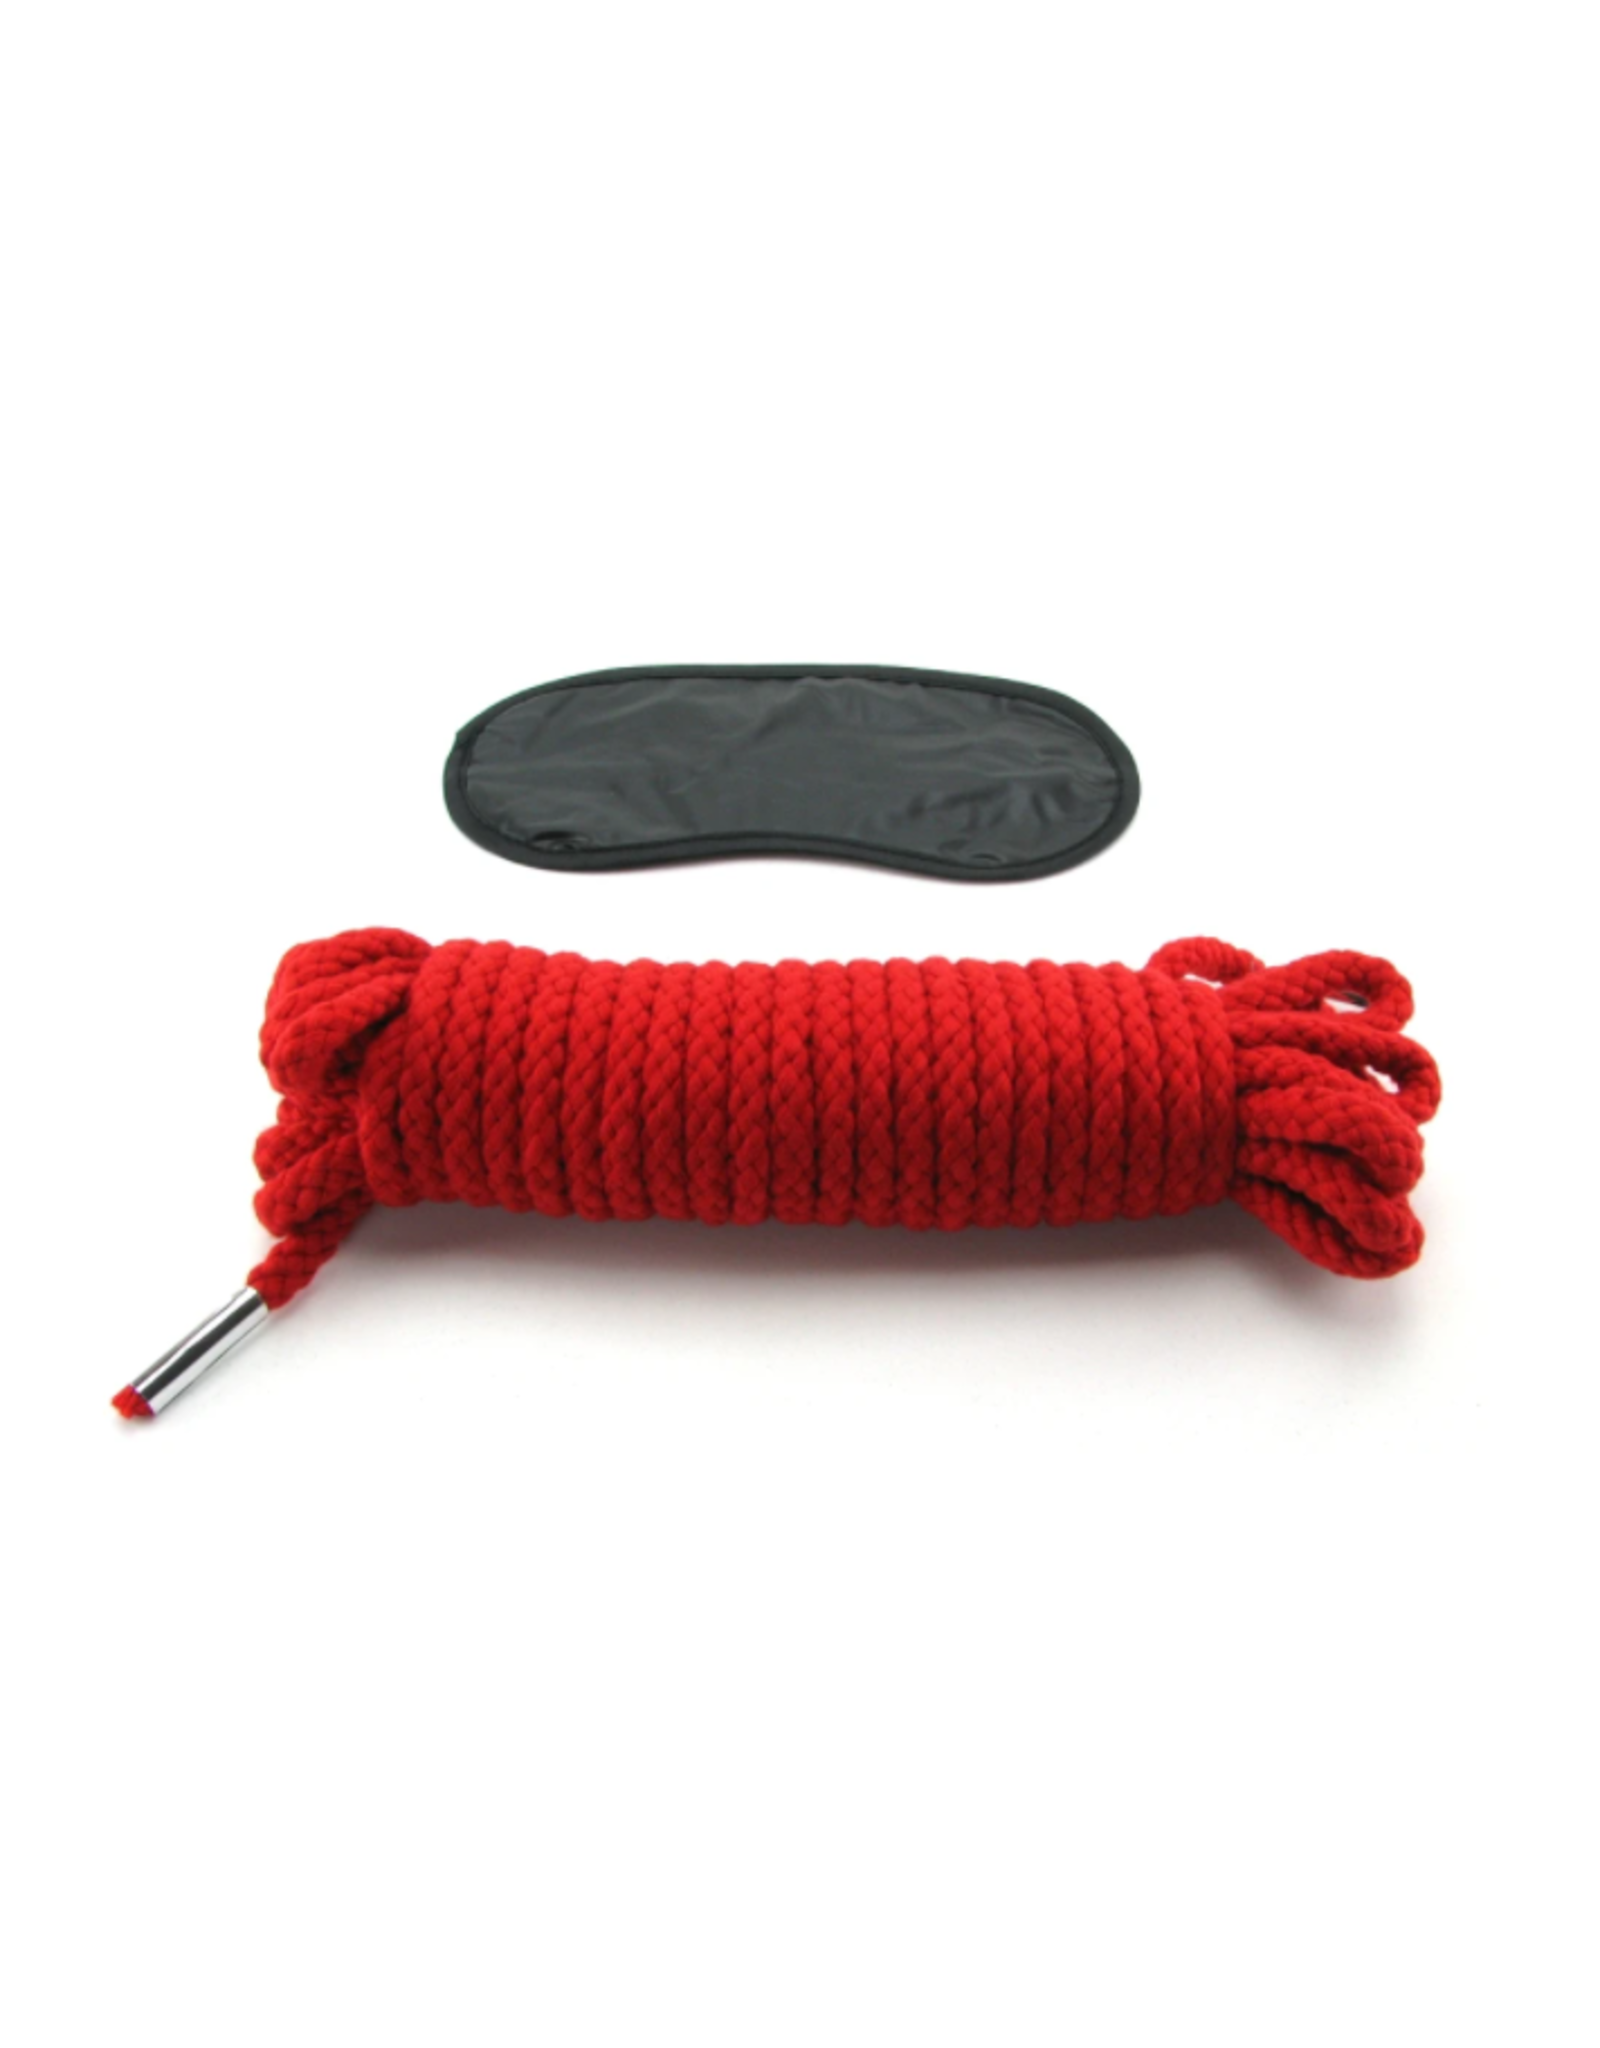 Pipedream Japanese Silk Rope - Red